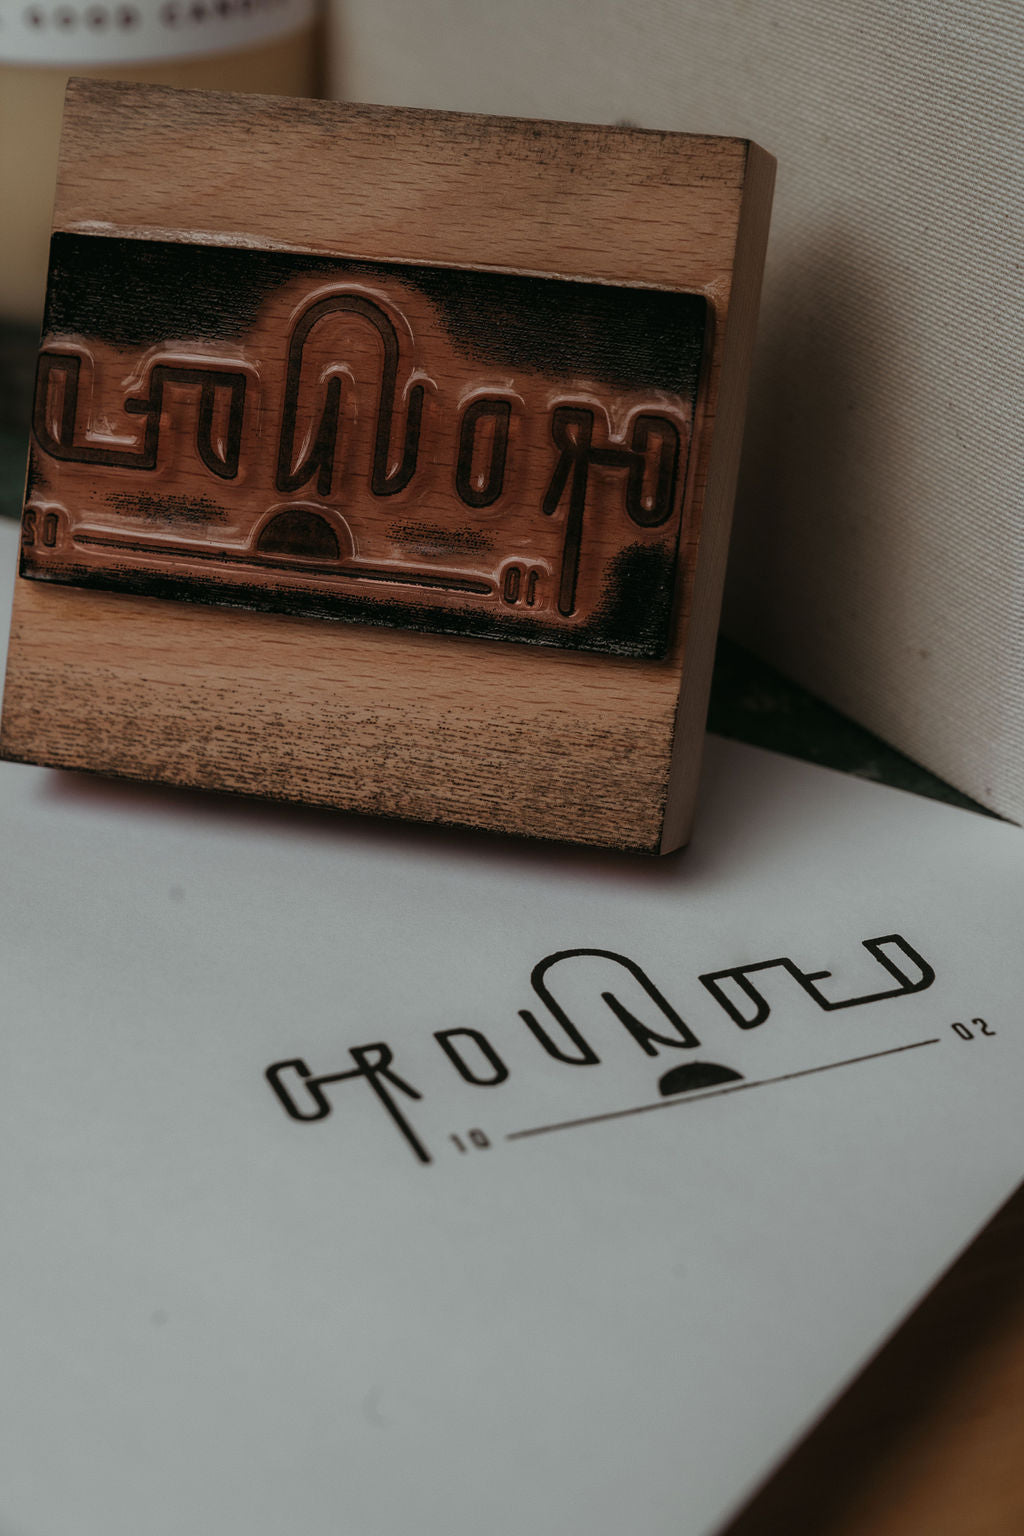 About Grounded 1002: Lifestyle, Experiences, and Store